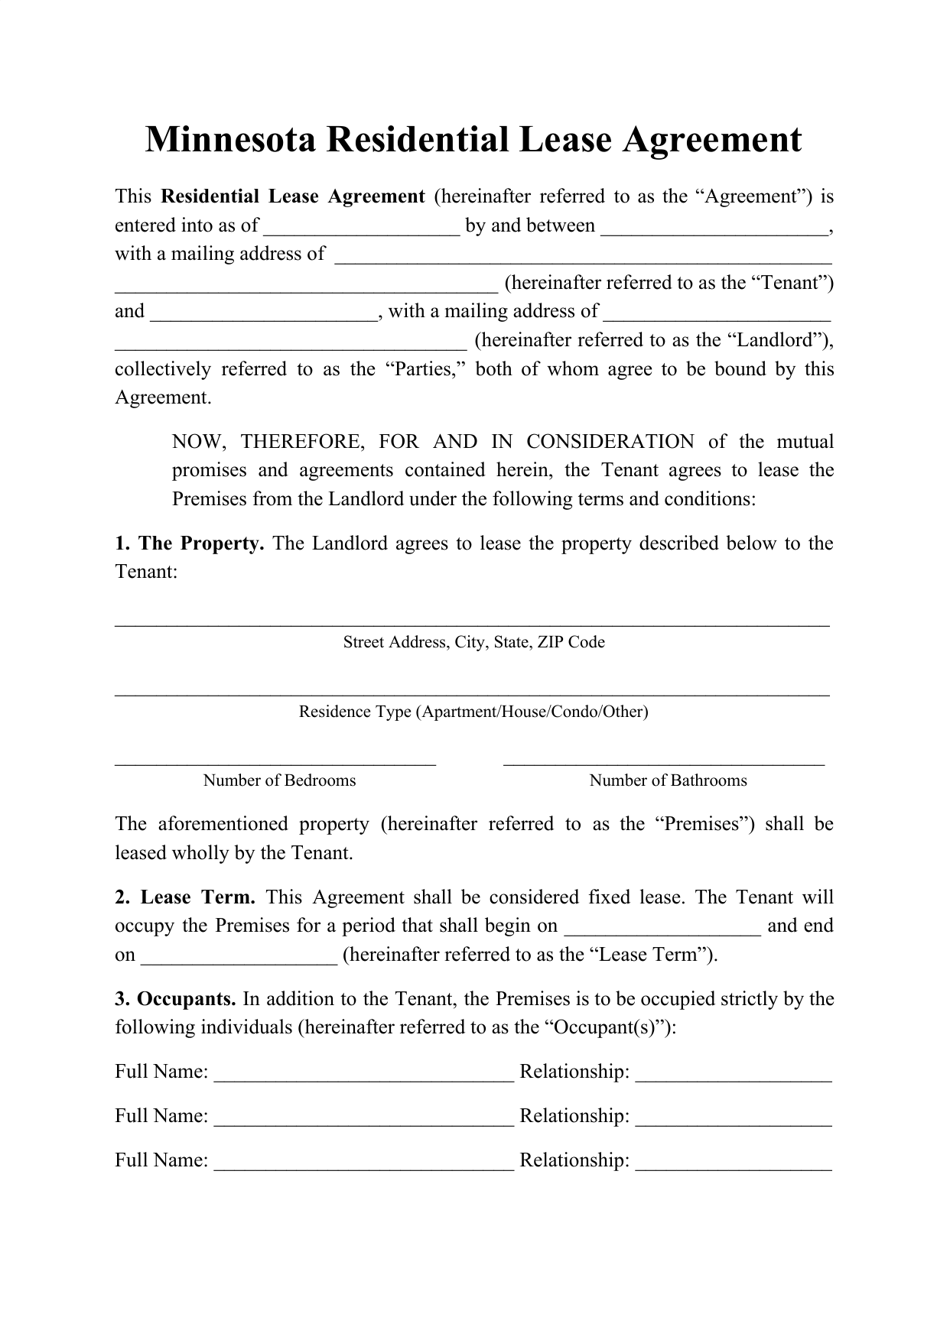 Minnesota Residential Lease Agreement Template Download Printable PDF Templateroller